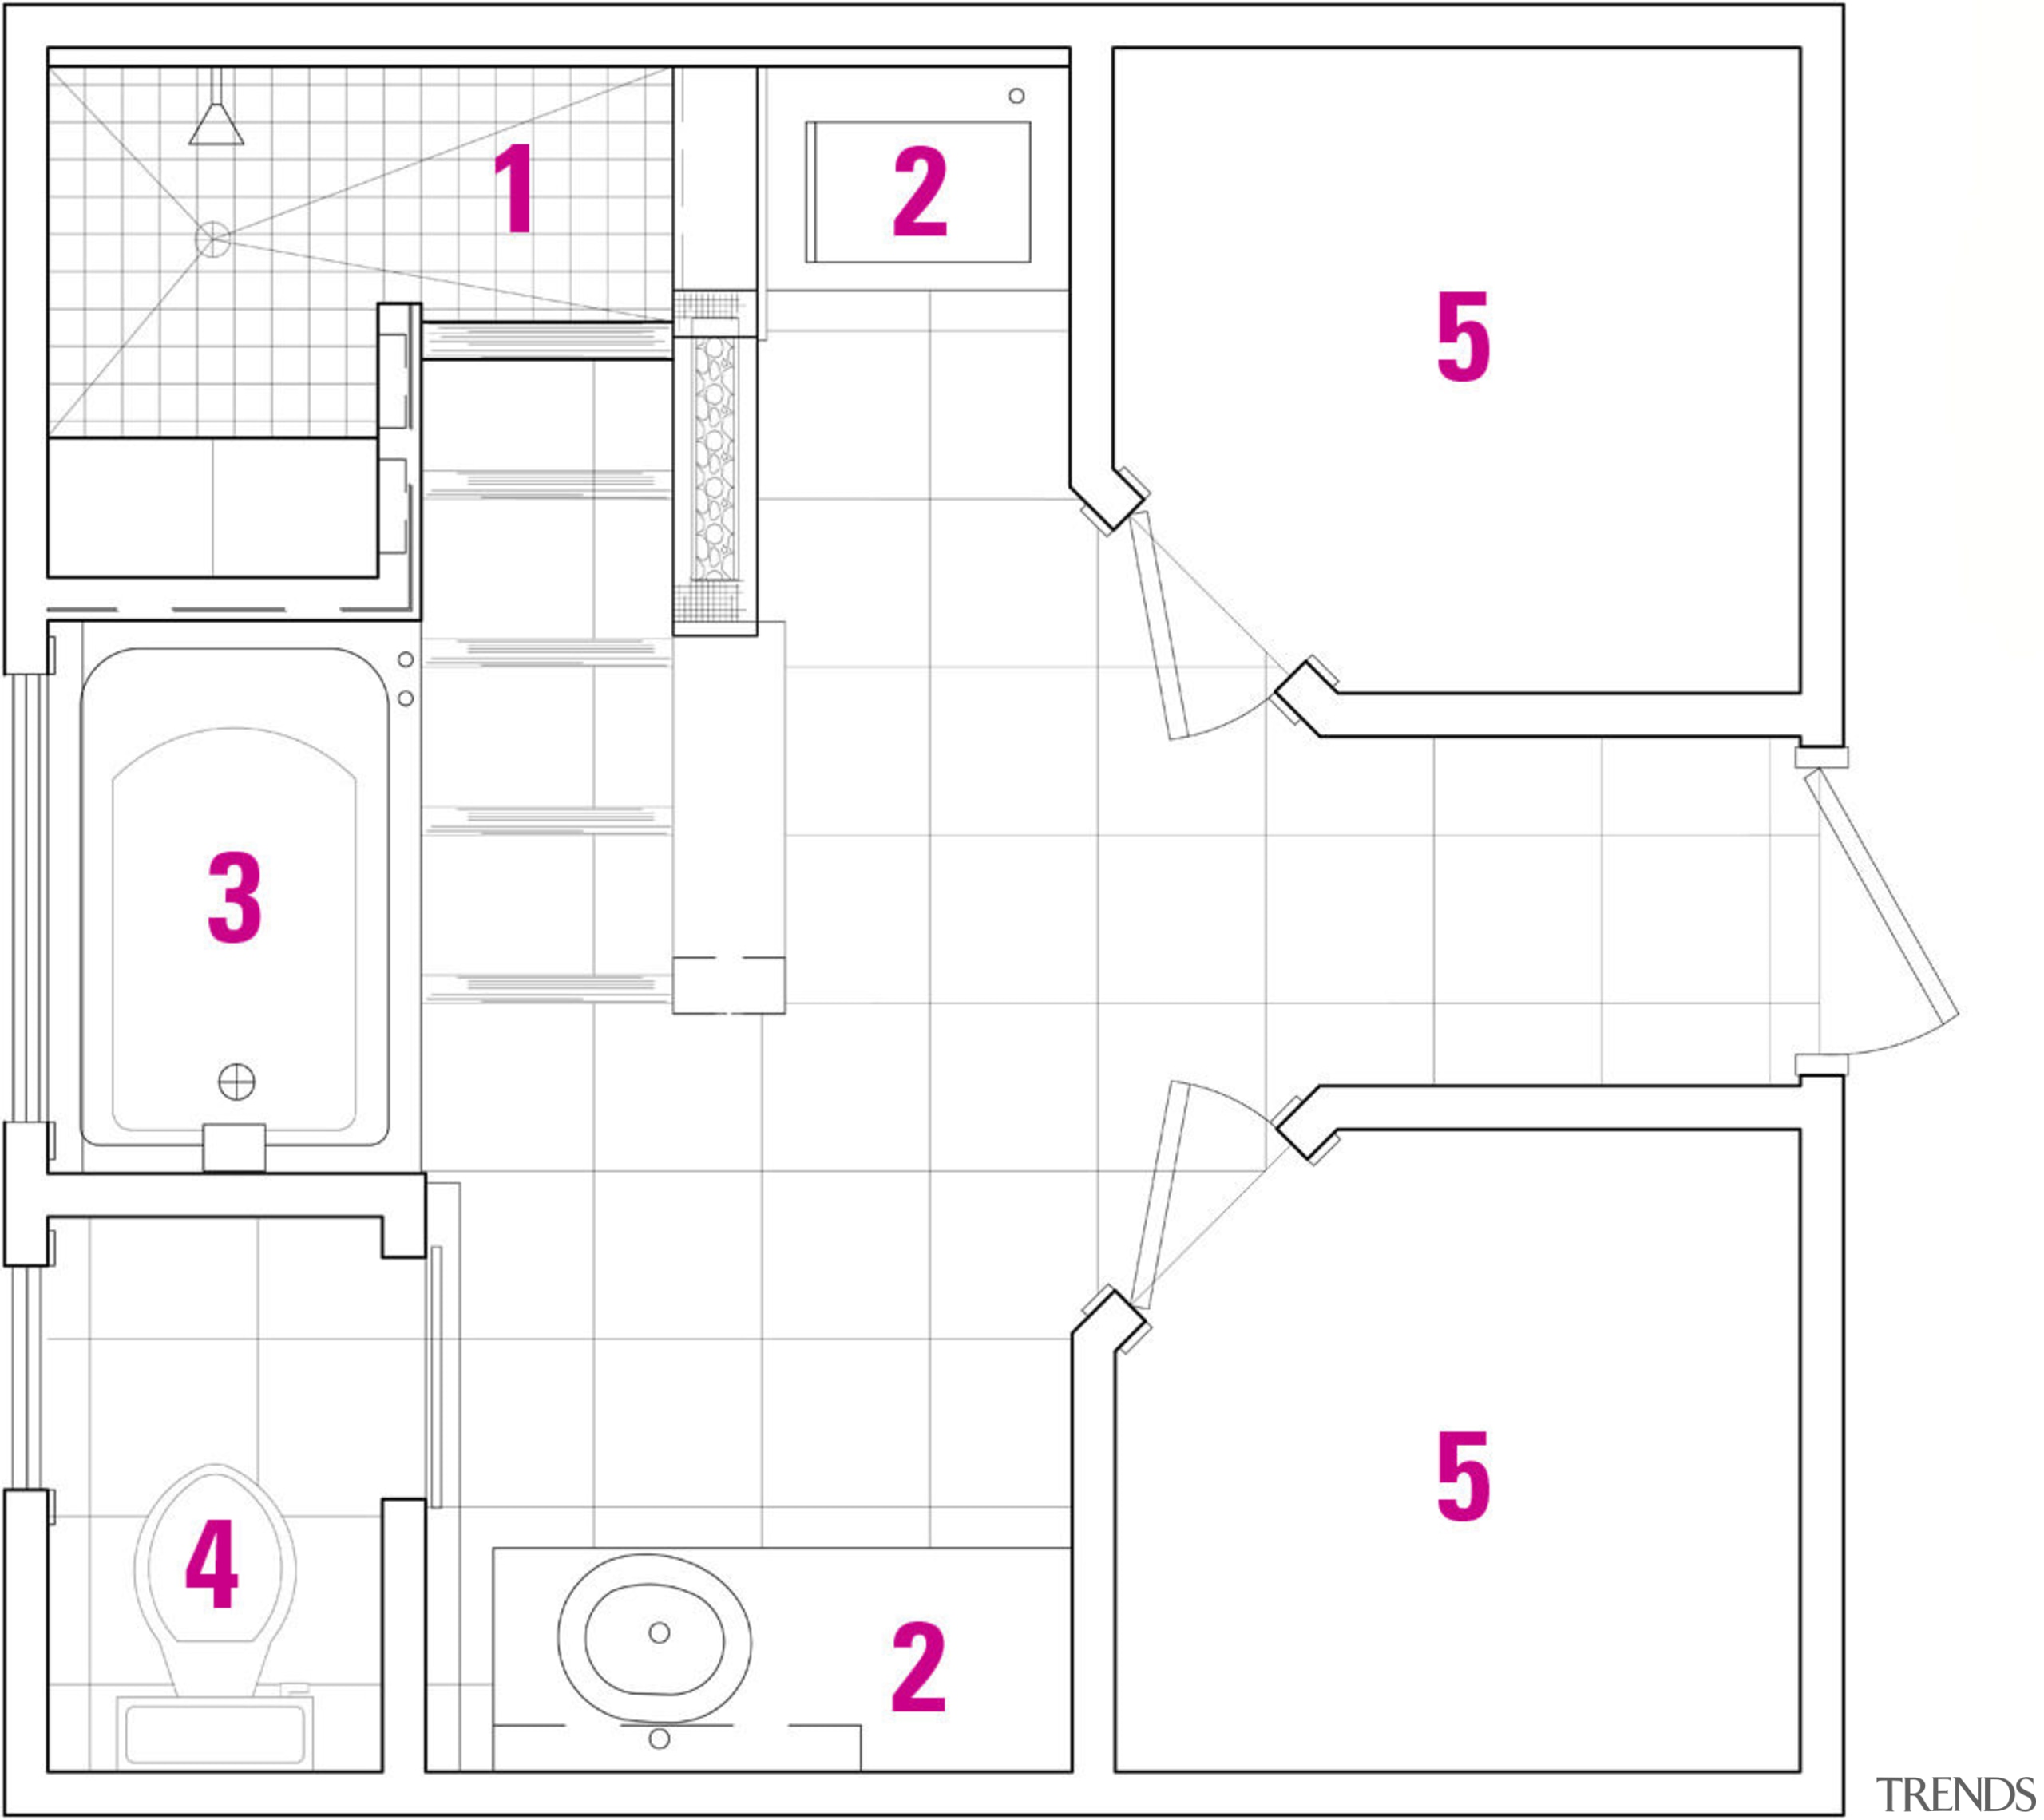 View of master bedroom layout. - View of angle, area, design, drawing, floor plan, line, product design, white